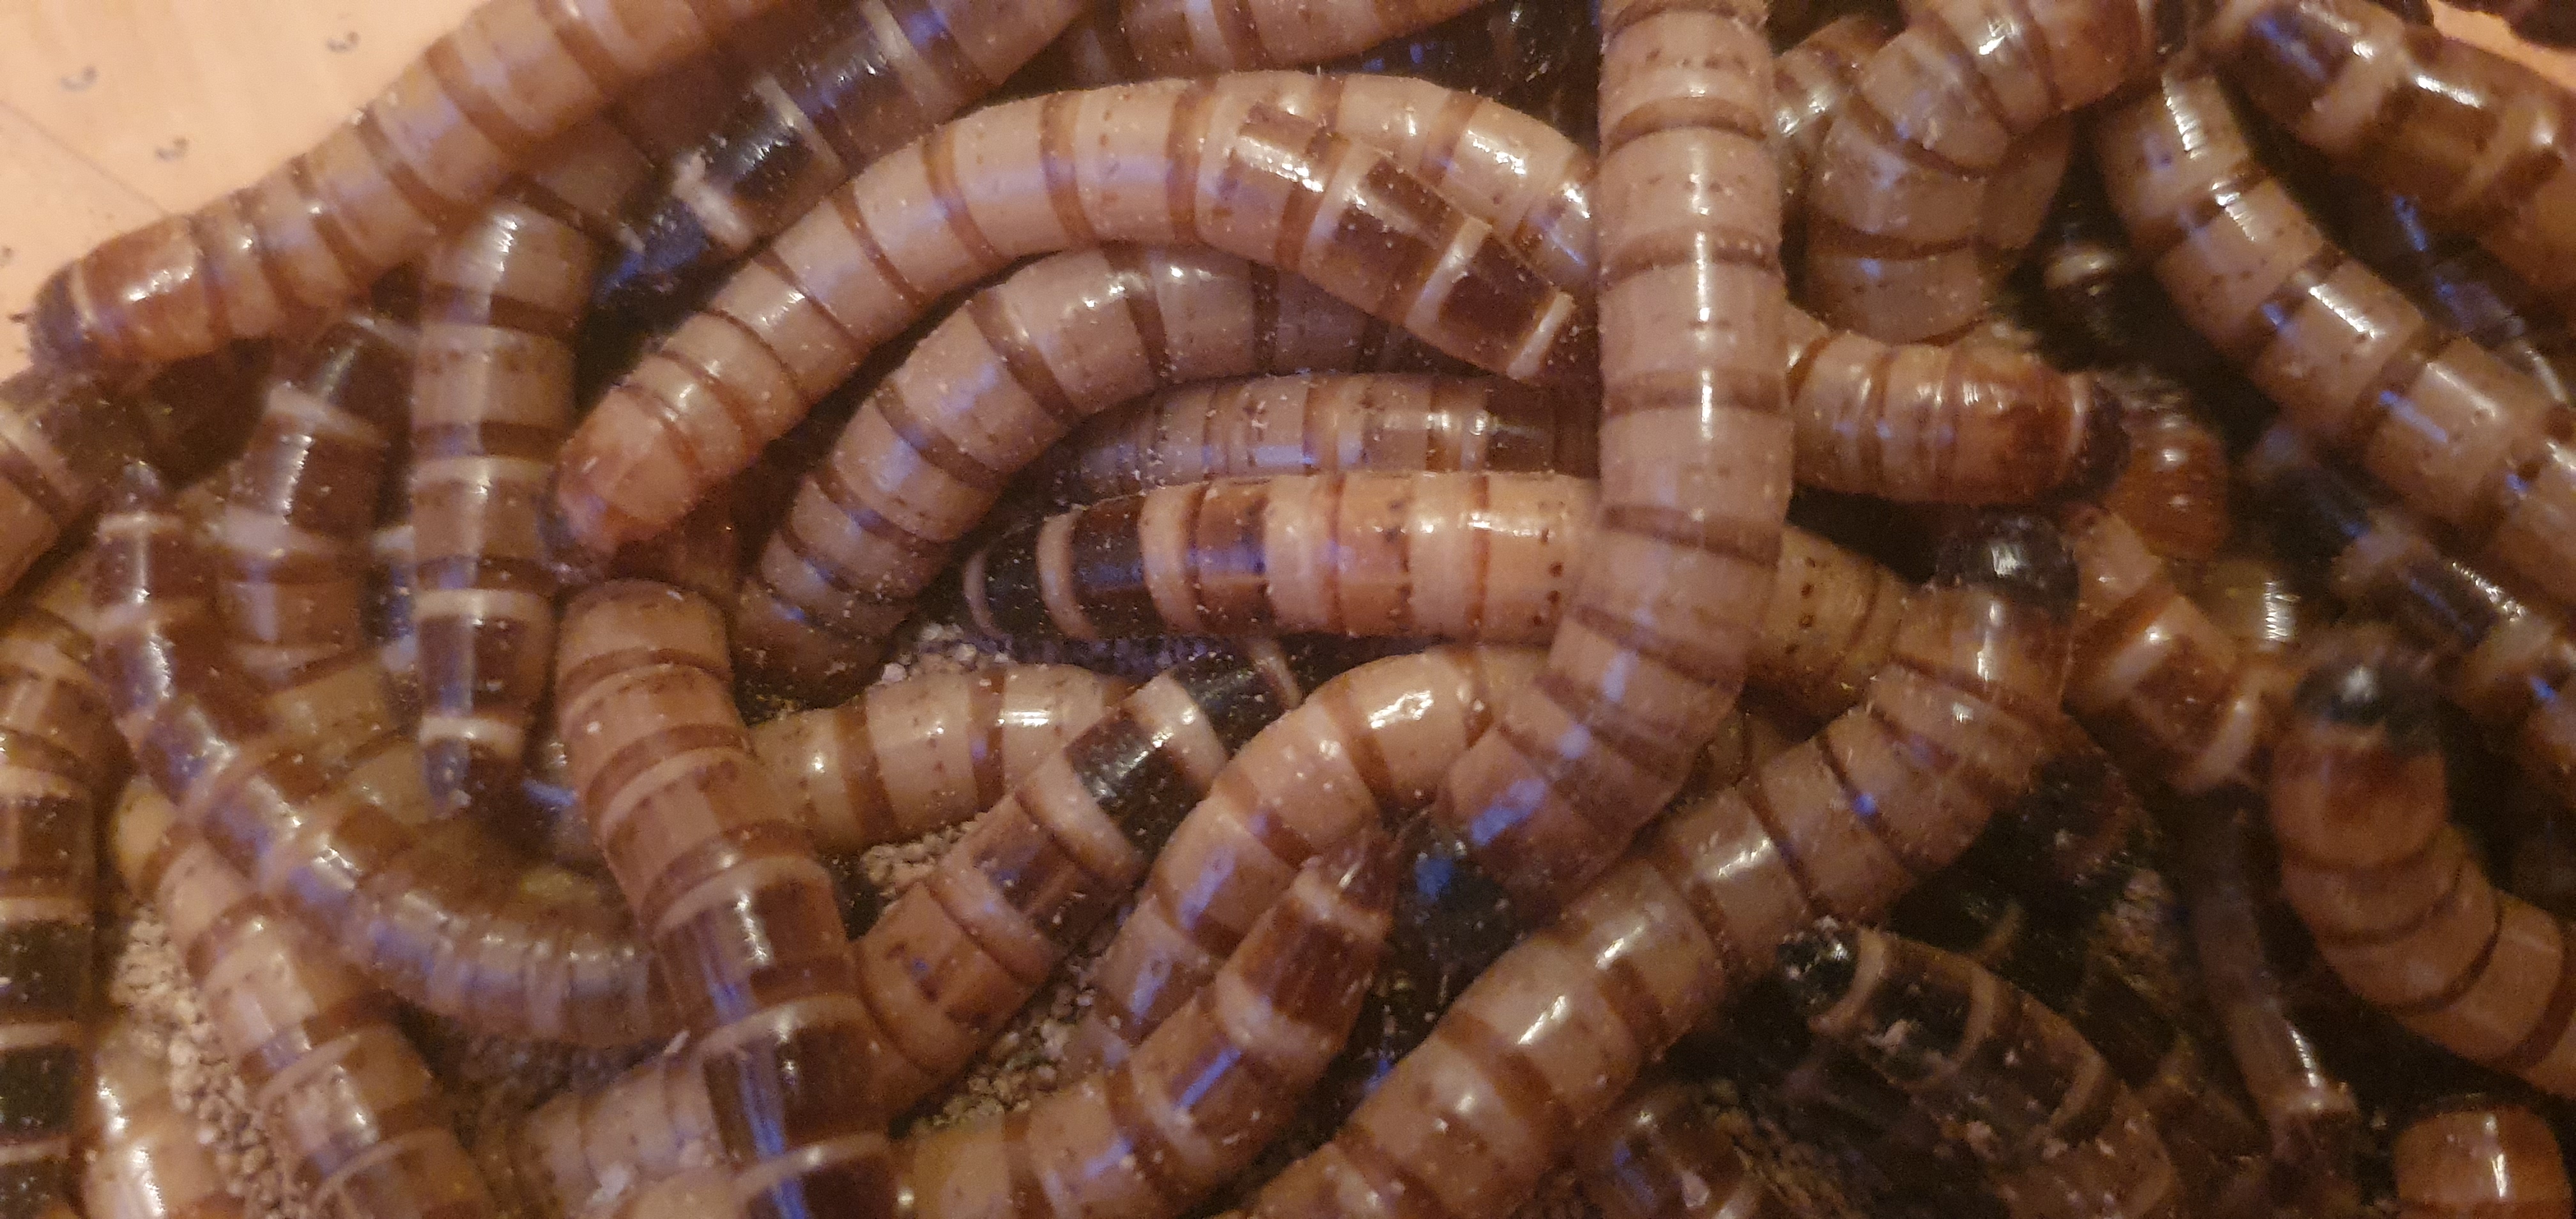 Mehlworms